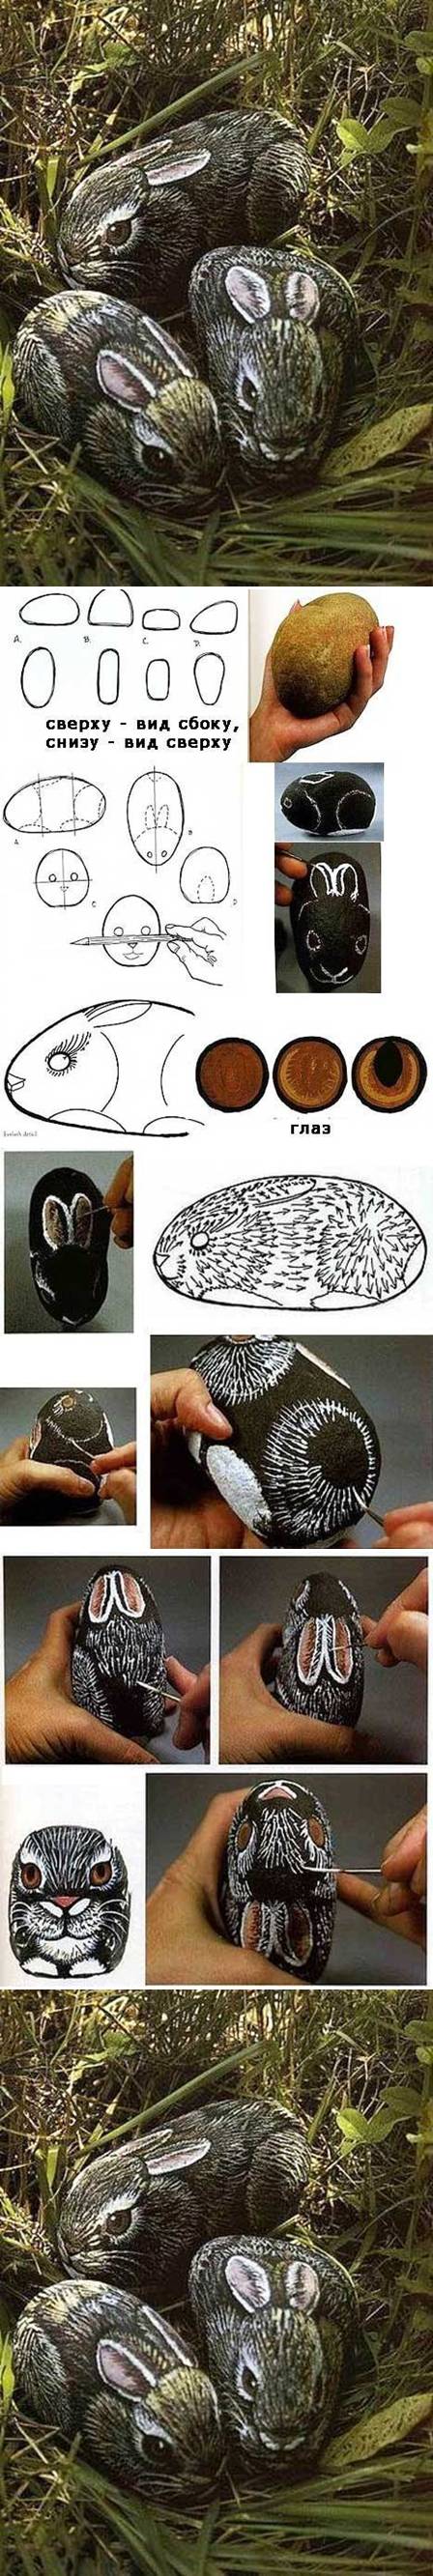 How to Transform a Stone to a Rabbit